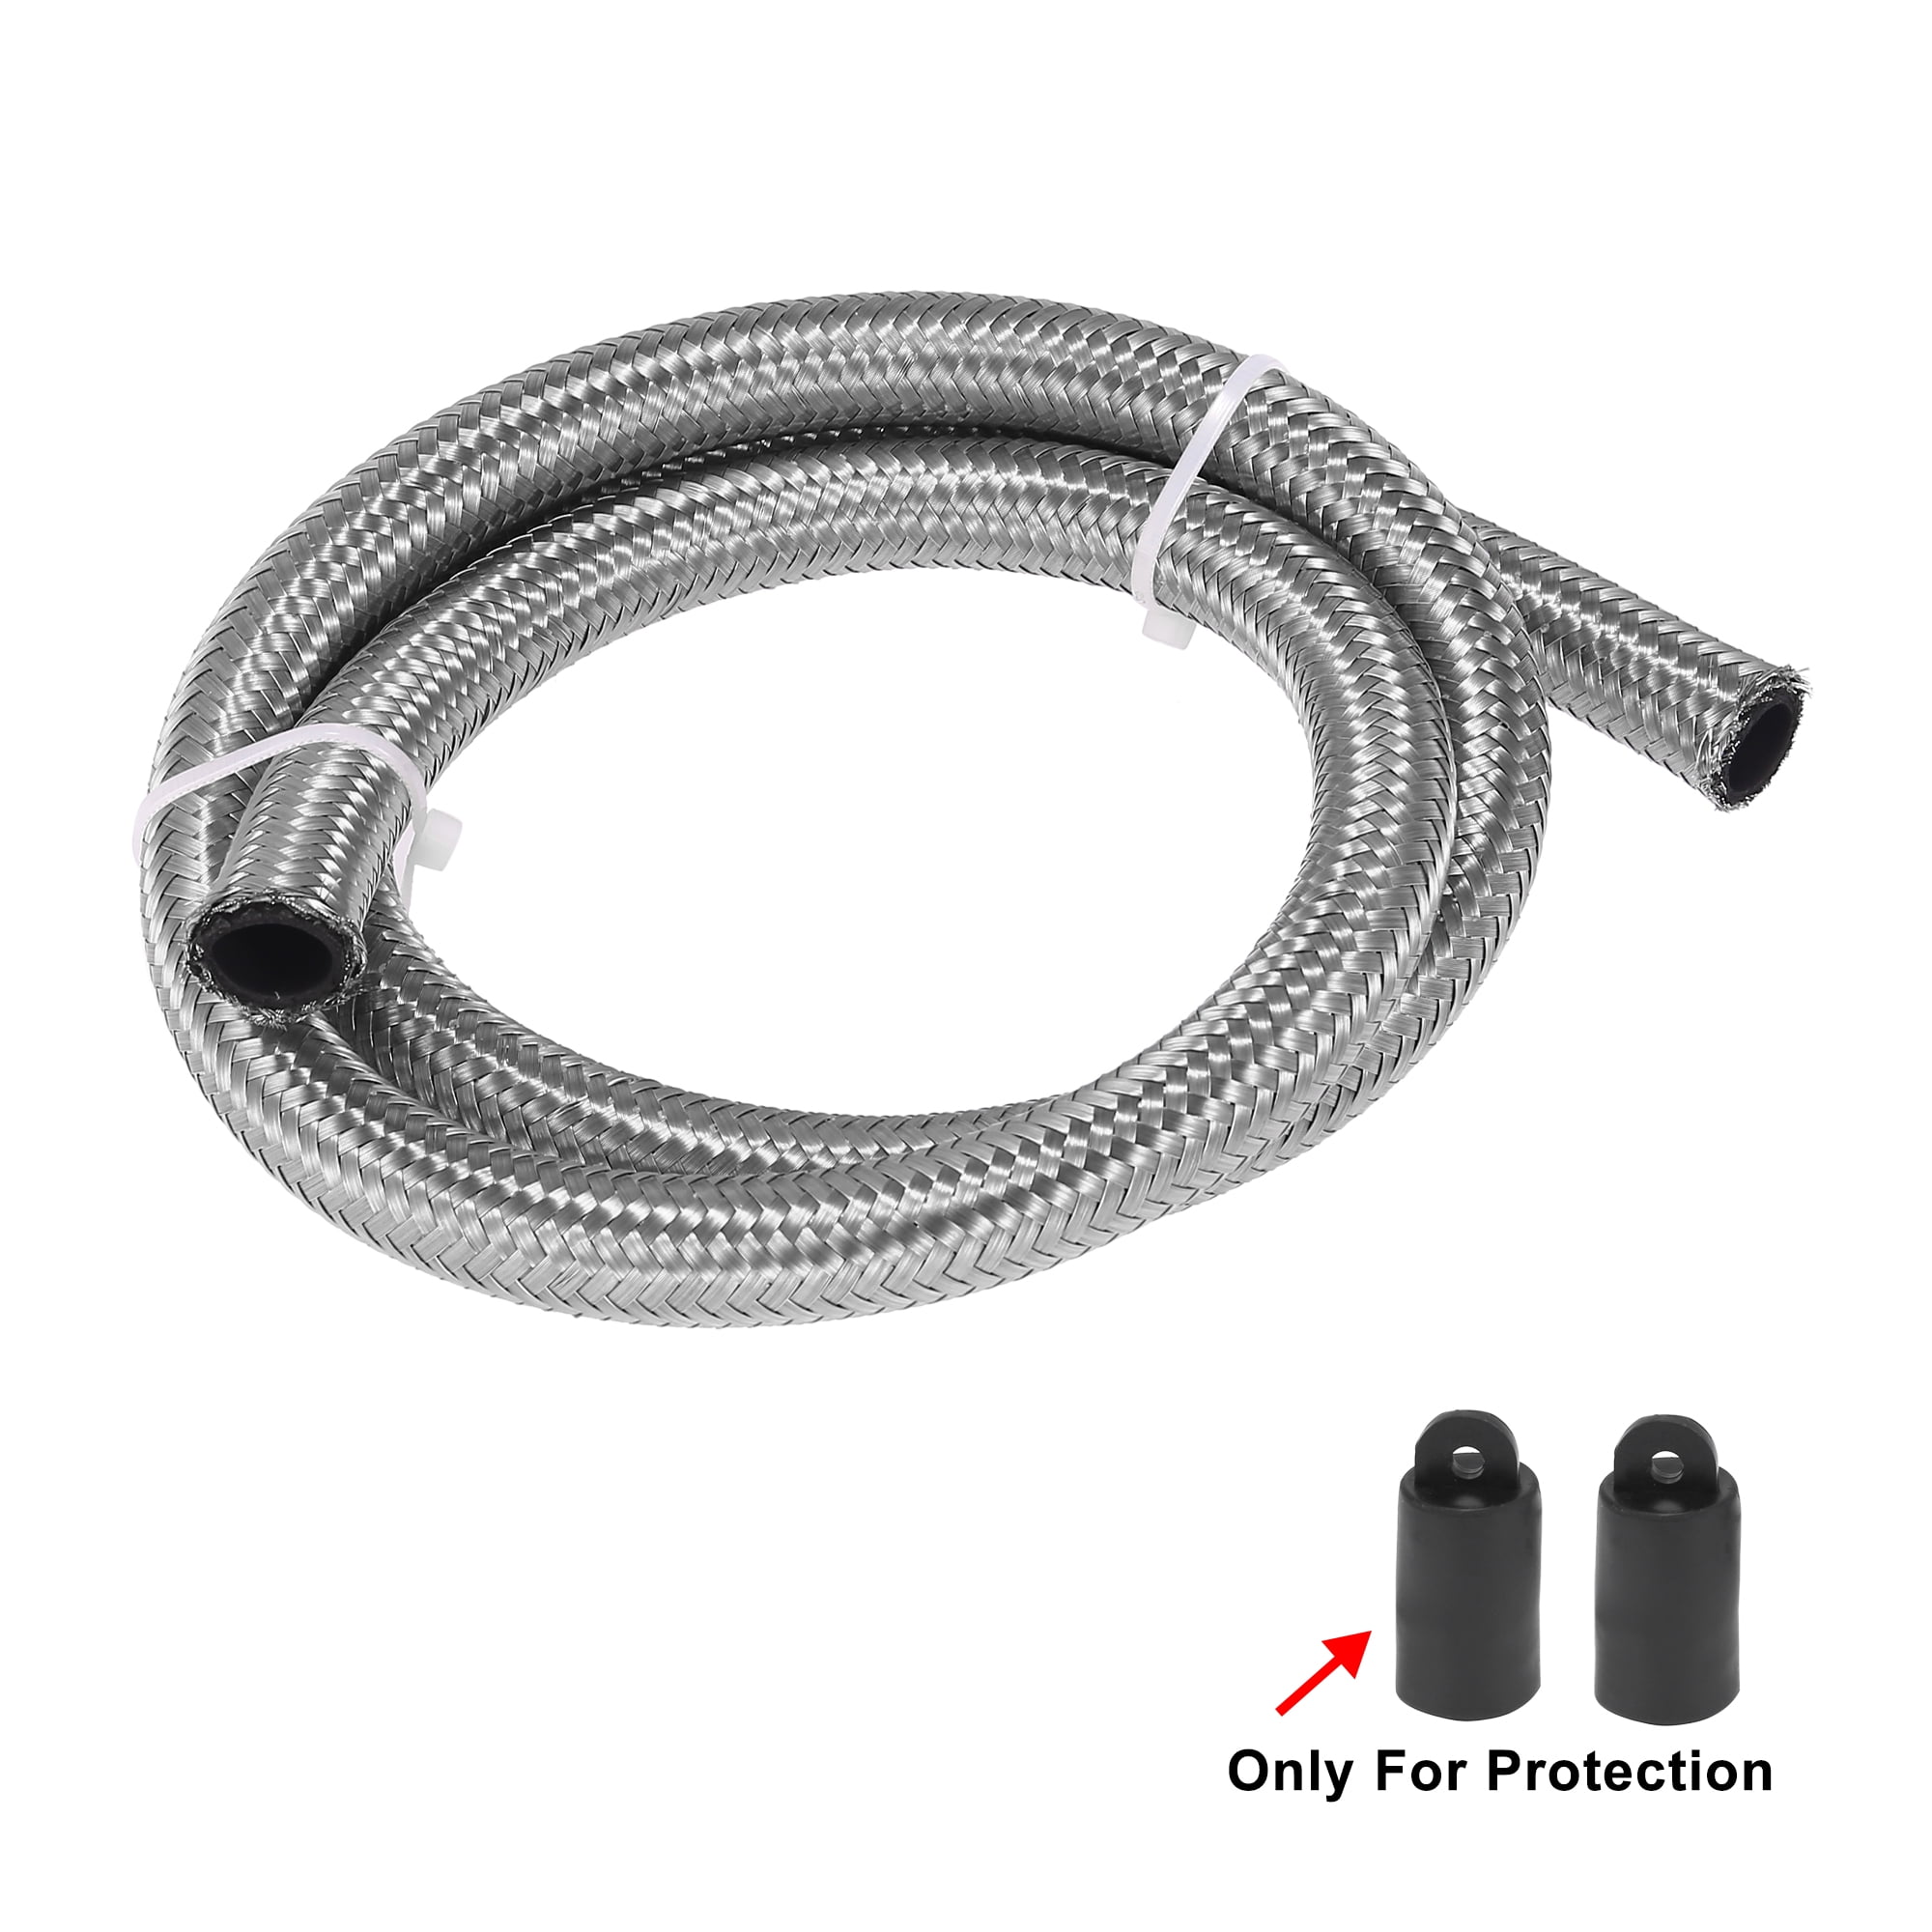 6AN AN6 Stainless Braided Fuel Hose Pipe Inside Diameter 8mm Silver 1 Metre 